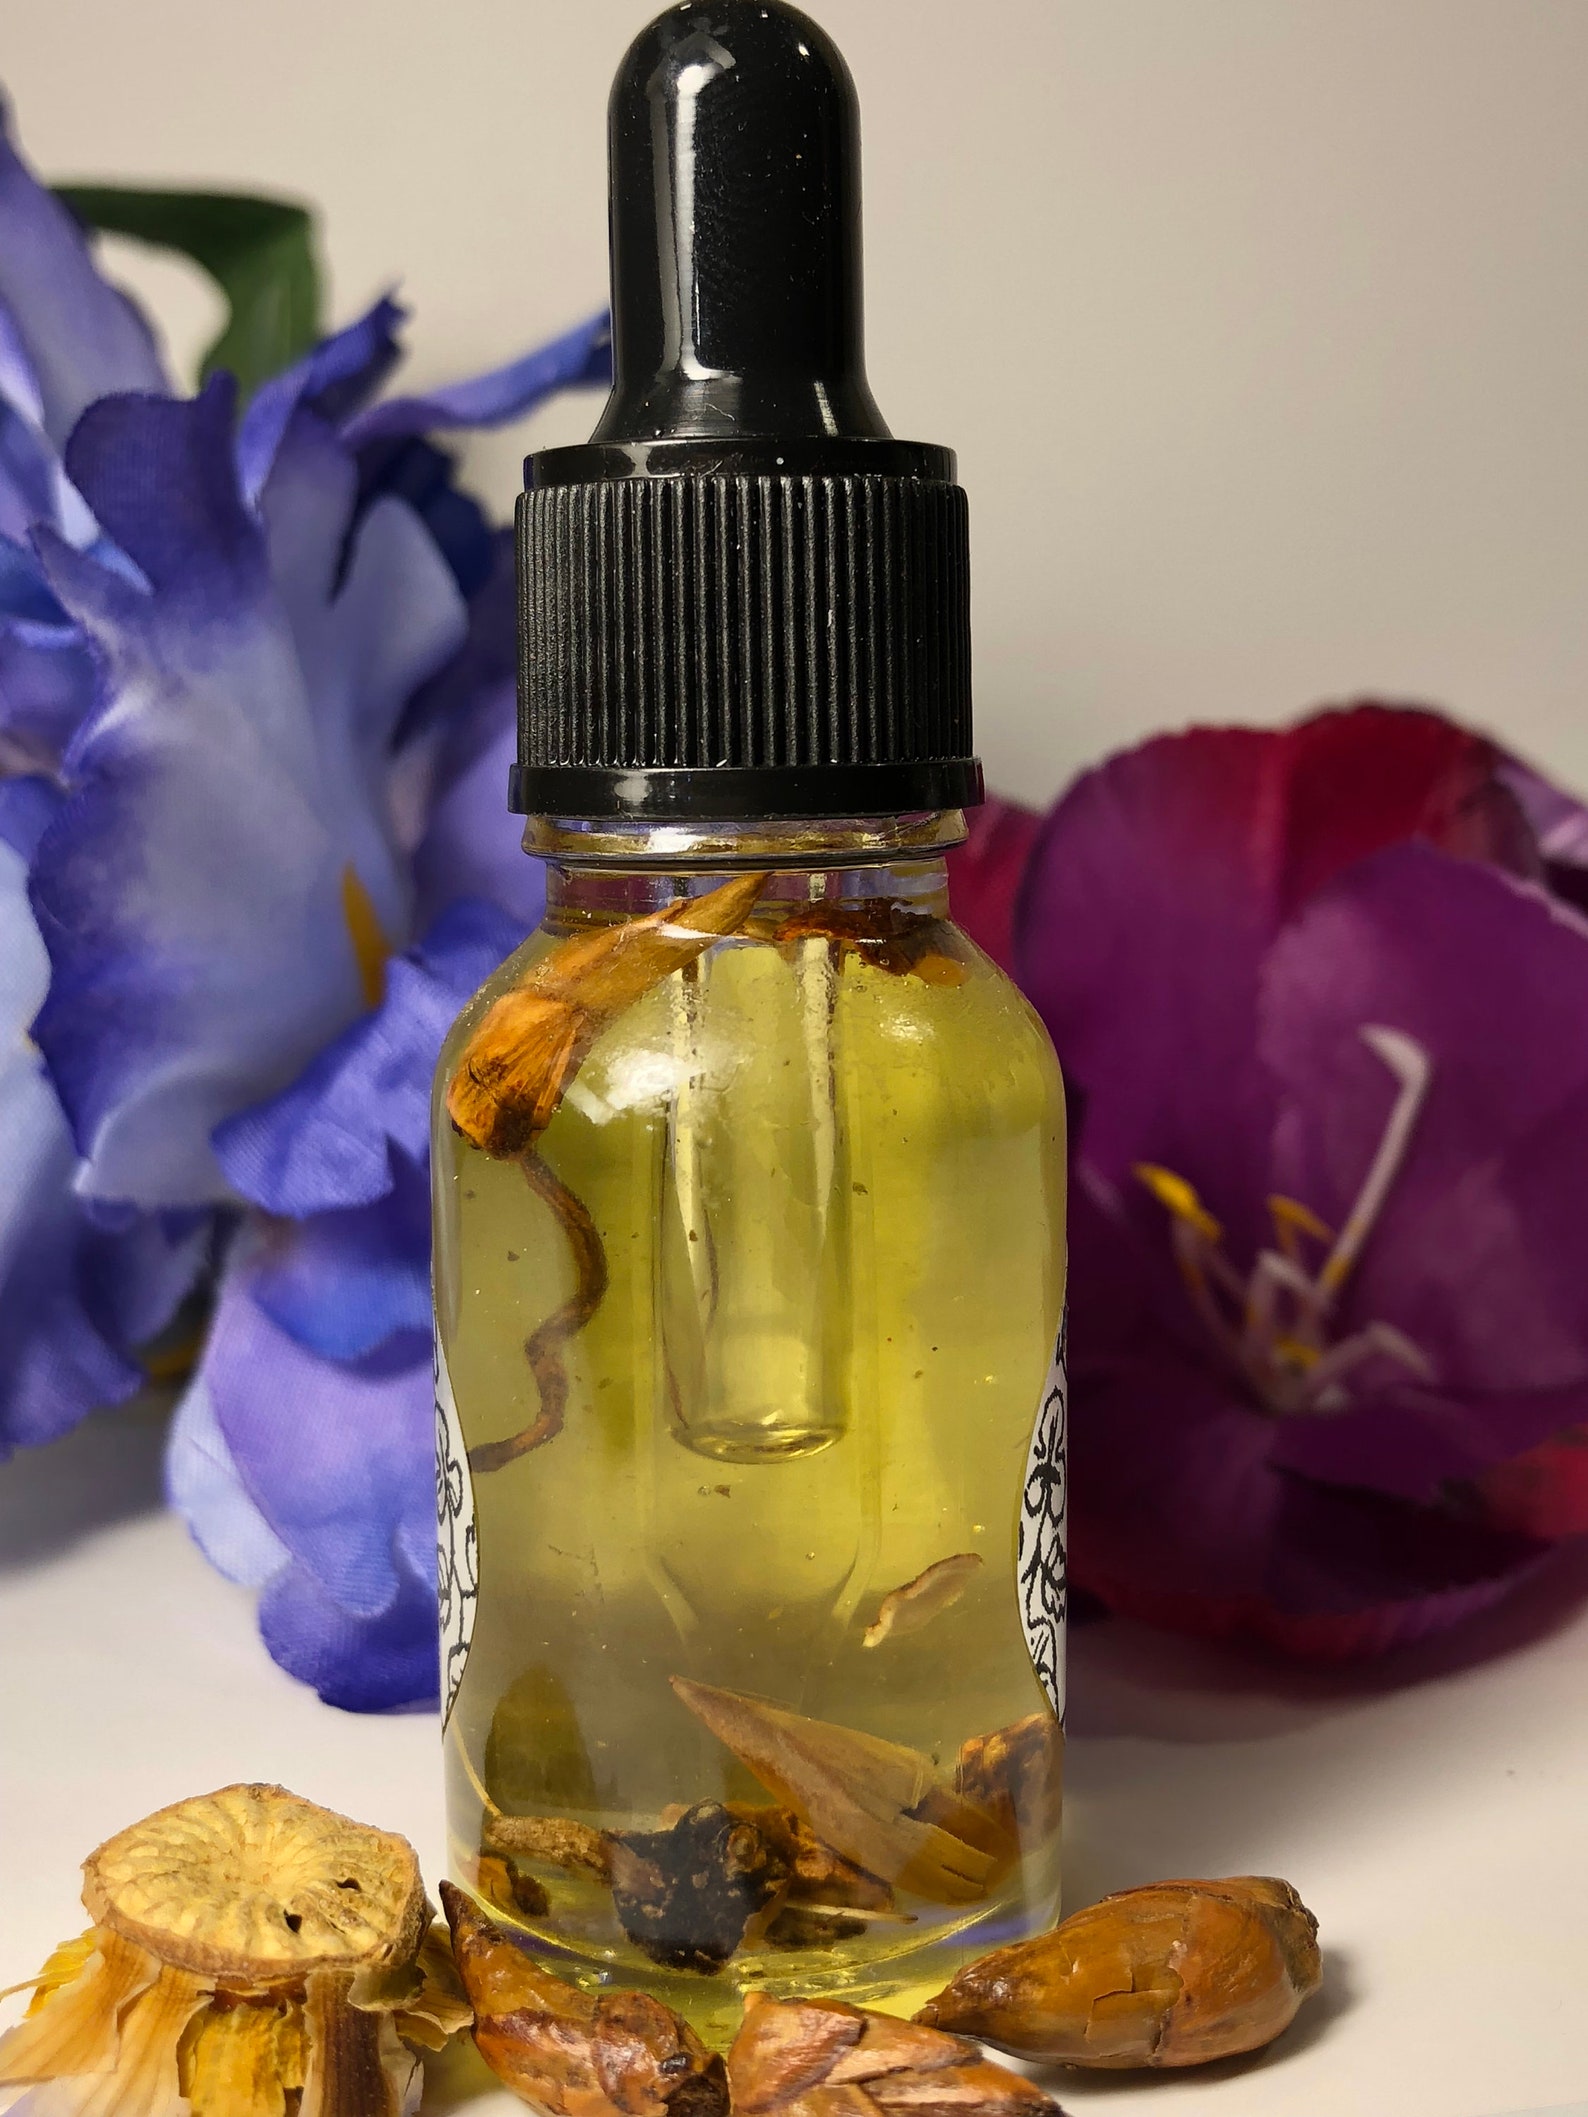 Adam & Eve Oil Anointing Oil Altar Hoodoo Witchcraft Pagan - Etsy